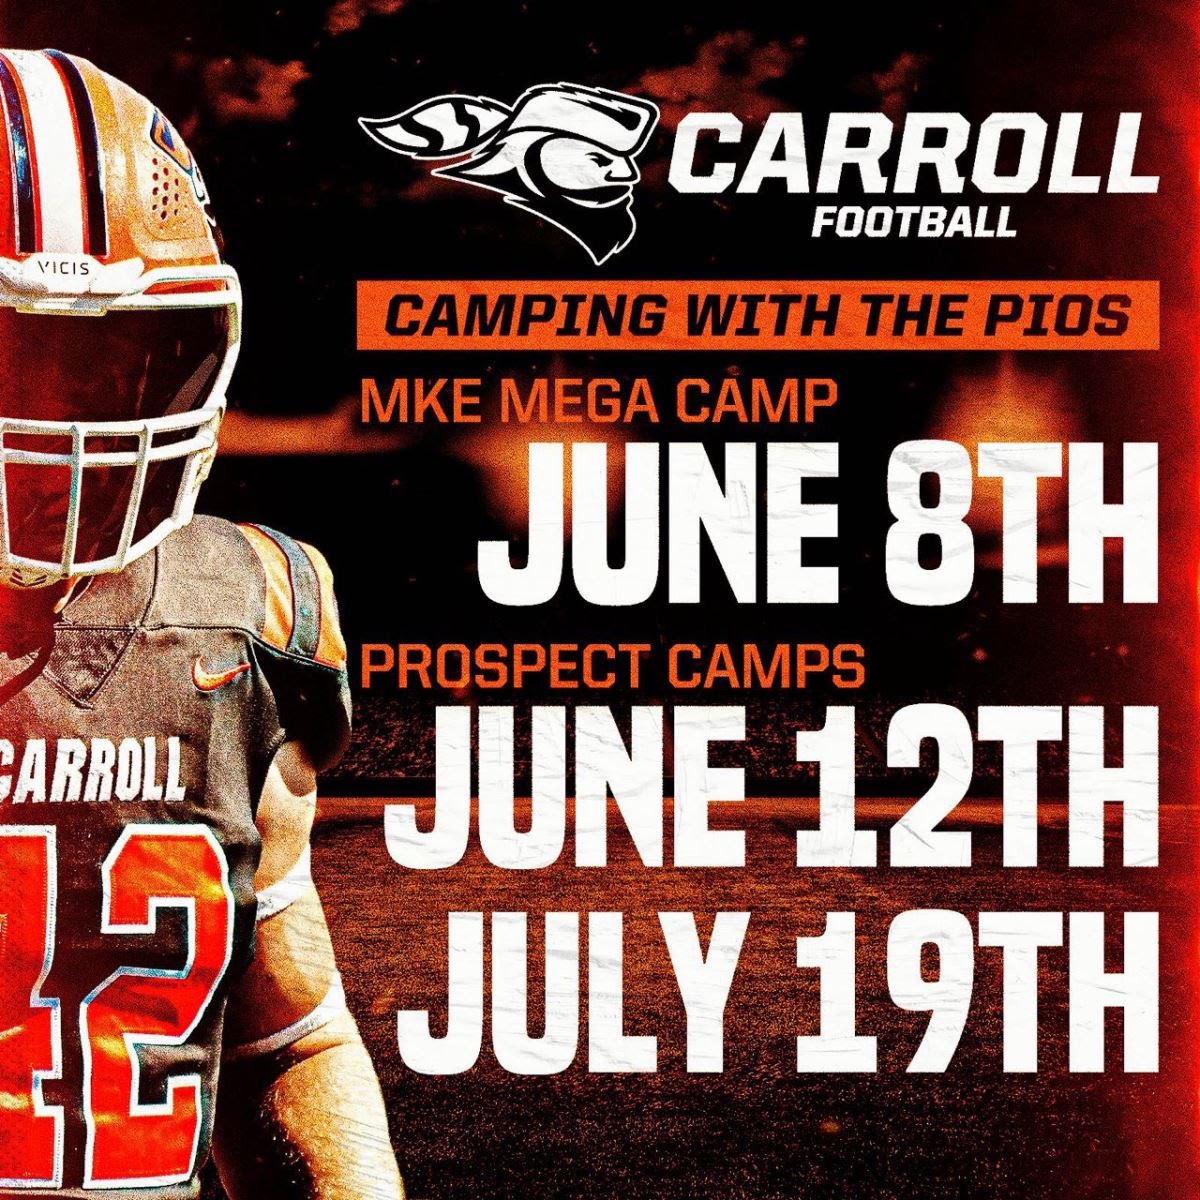 Thank you for the invite! @piofootball @MWWildcatFB @coachHargerMWFB